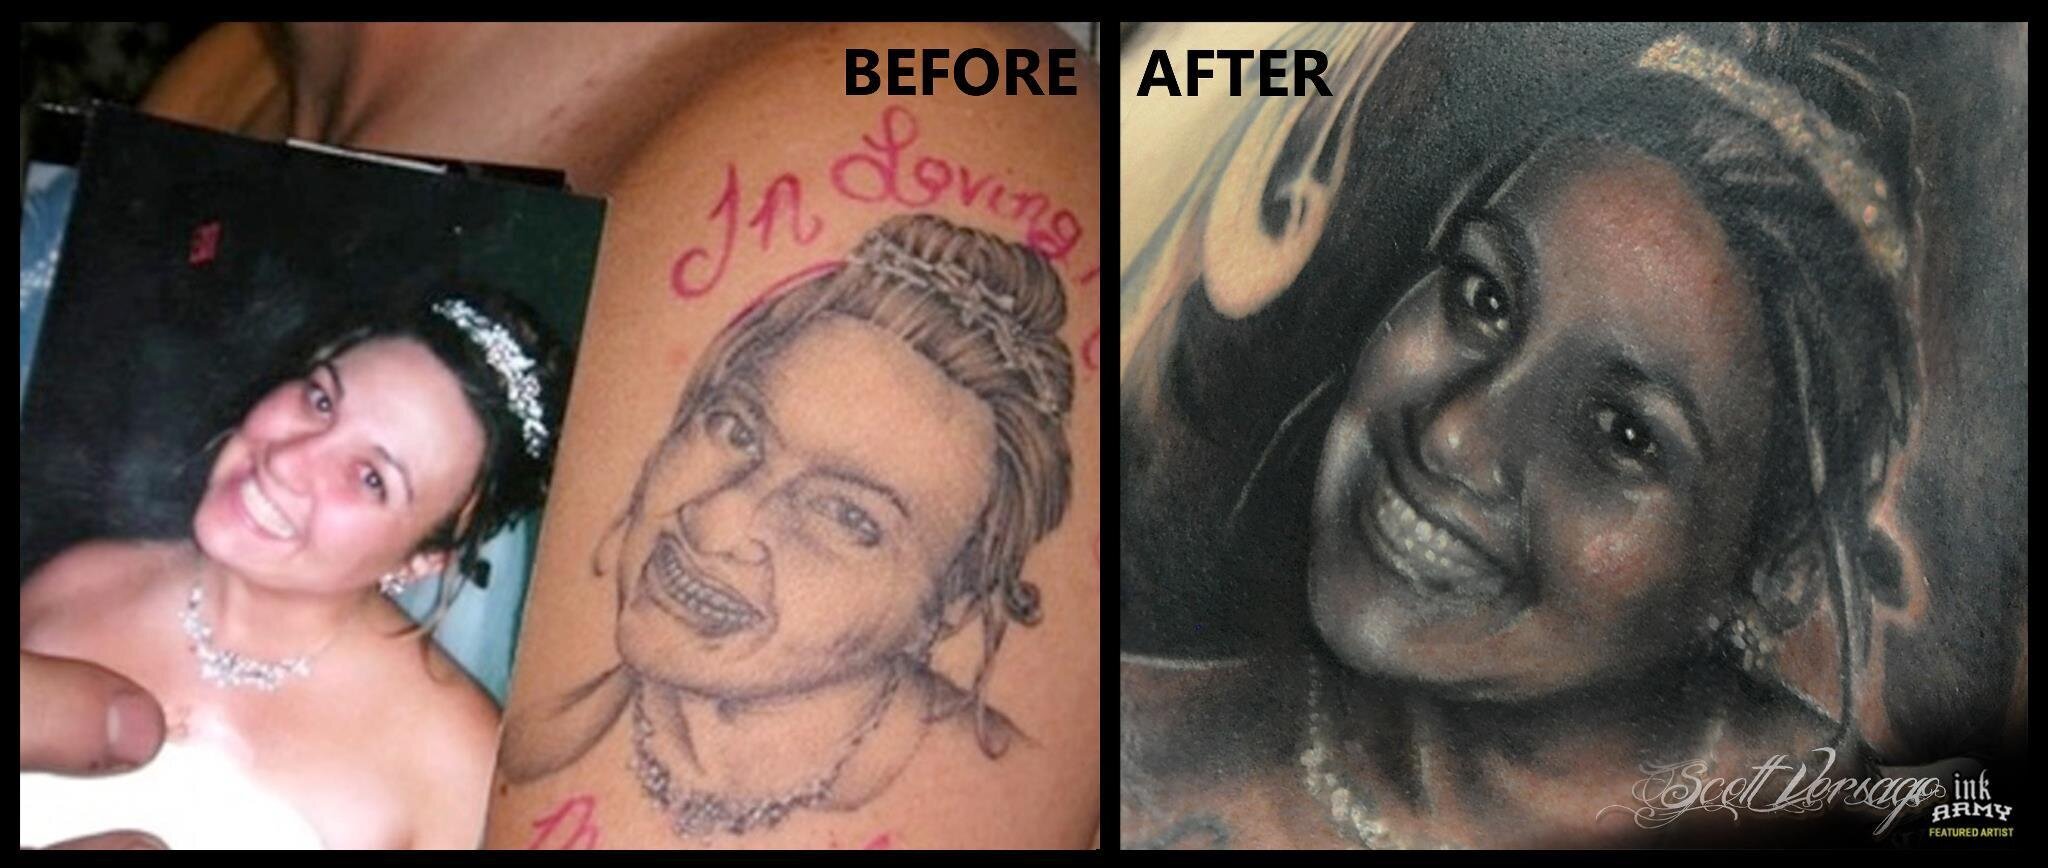 How to Tell a Good Tattoo From a Bad Tattoo  Tattoo Ideas Artists and  Models